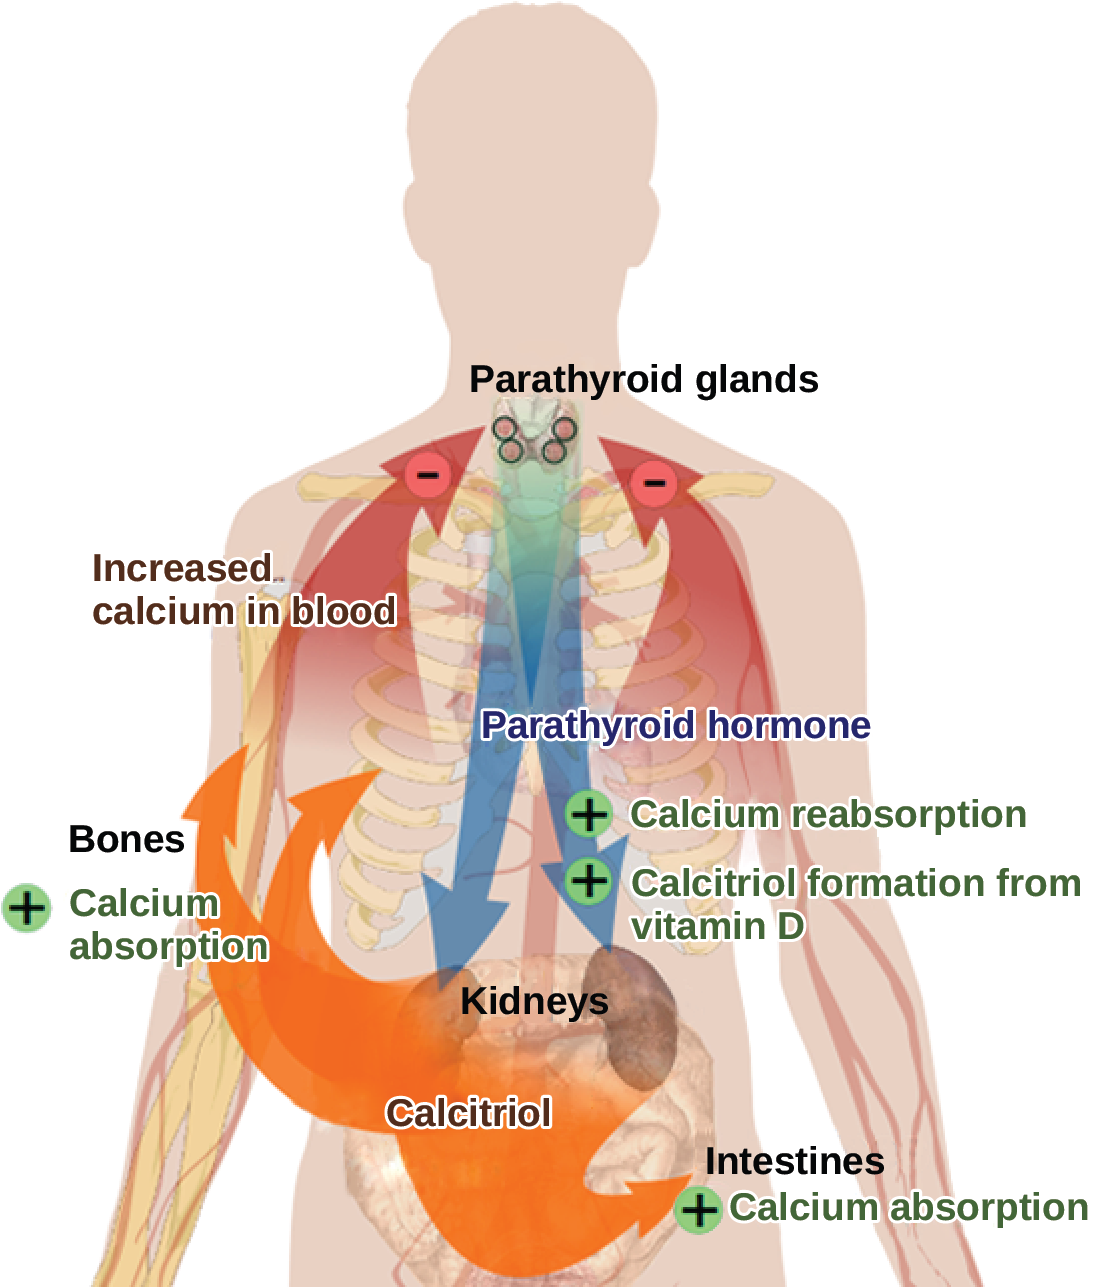 The parathyroid glands, which are located in the neck, release parathyroid hormone, or PTH. PTH causes the release of calcium from bone and triggers the reabsorption of calcium from the urine in the kidneys. PTH also triggers the formation of calcitriol from vitamin D. Calcitriol causes the intestines to absorb more calcium. The result is increased calcium in the blood.